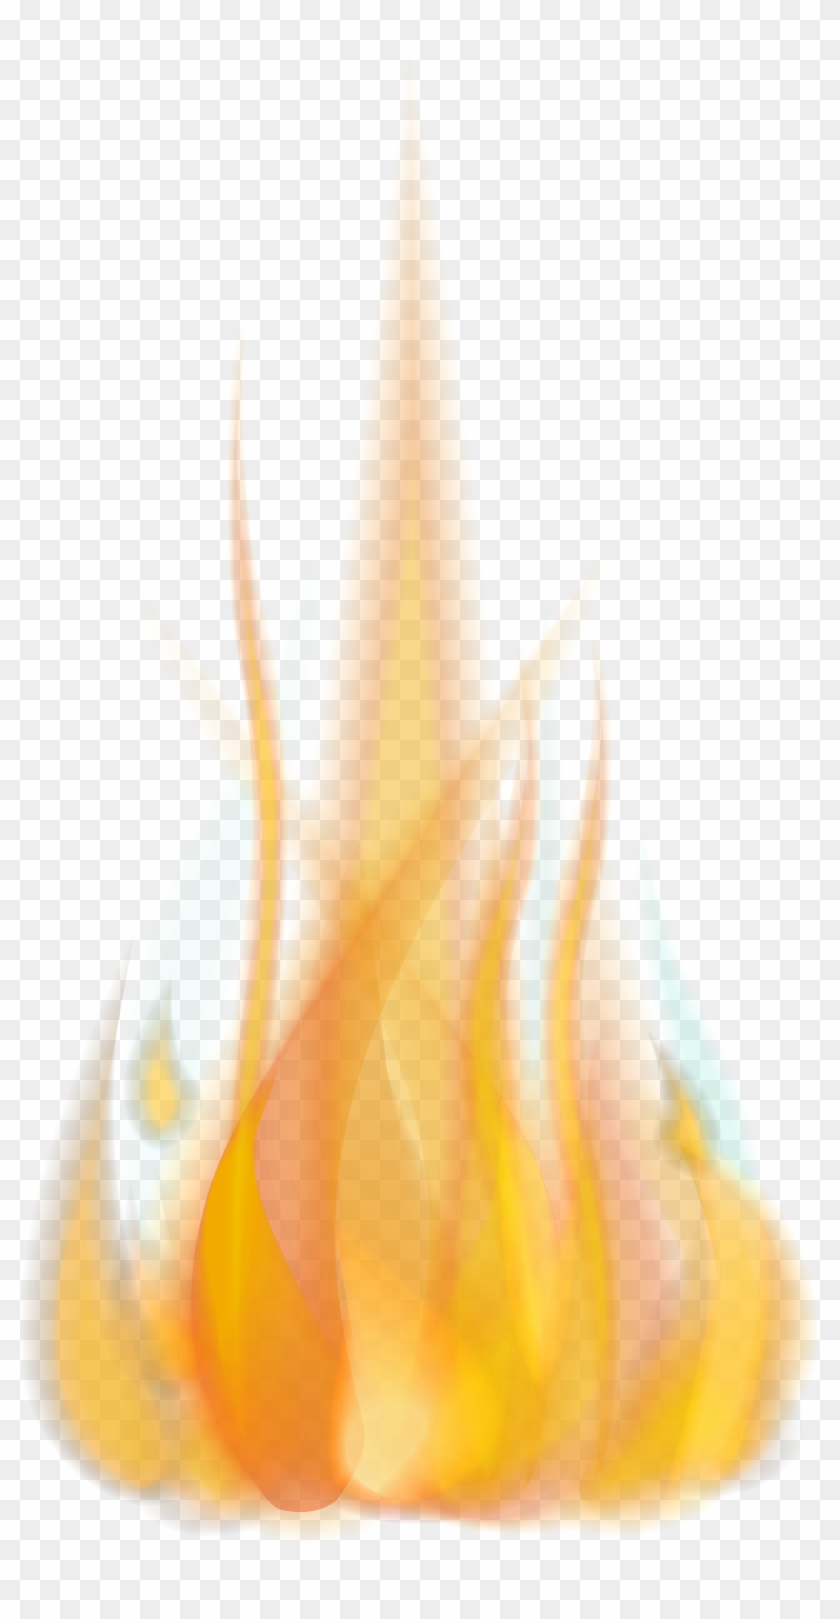 Fire Flame Png Clip Art Image - Fire Flame Png Transparent #34952